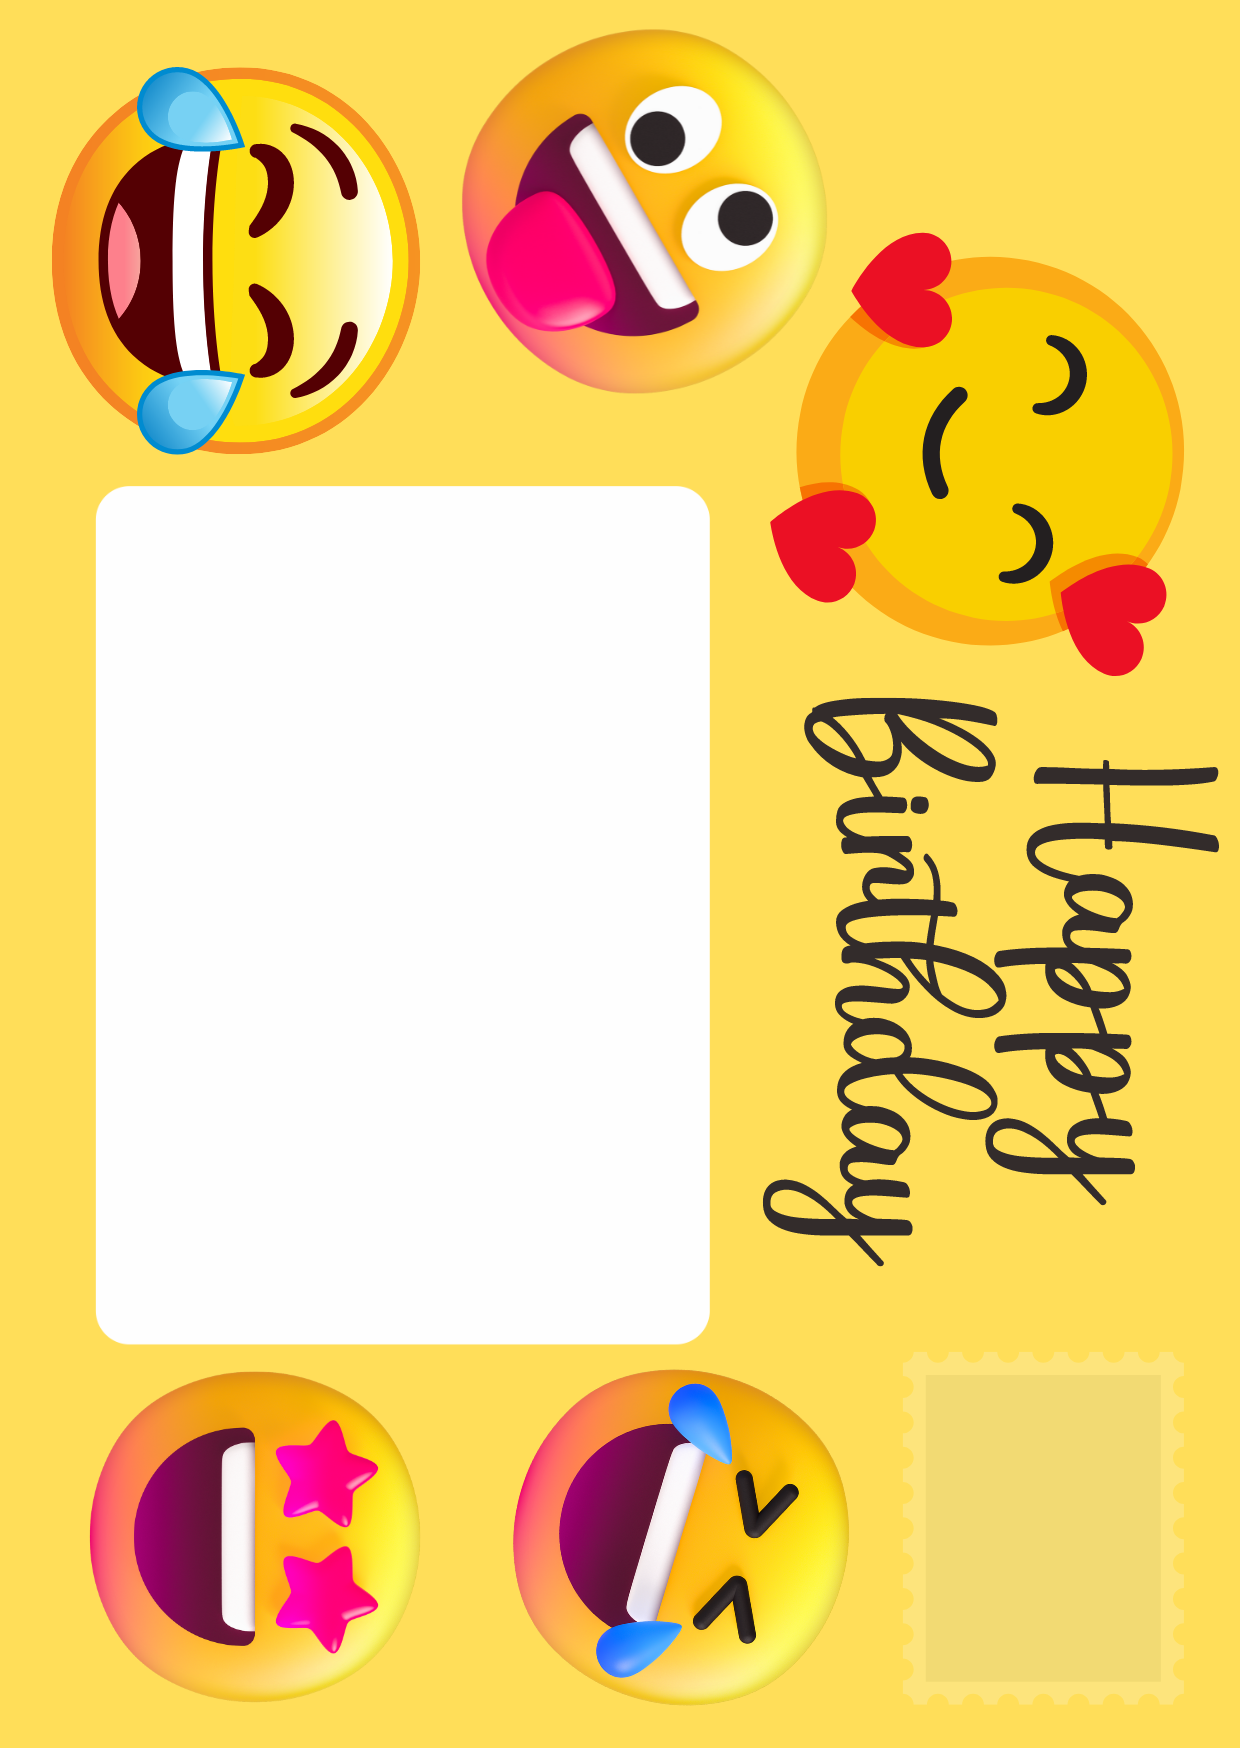 Image shows front of posting pages with yellow background and positive emojis. There is a white rectangle space for address and marker for stamp. Message reads Happy Birthday